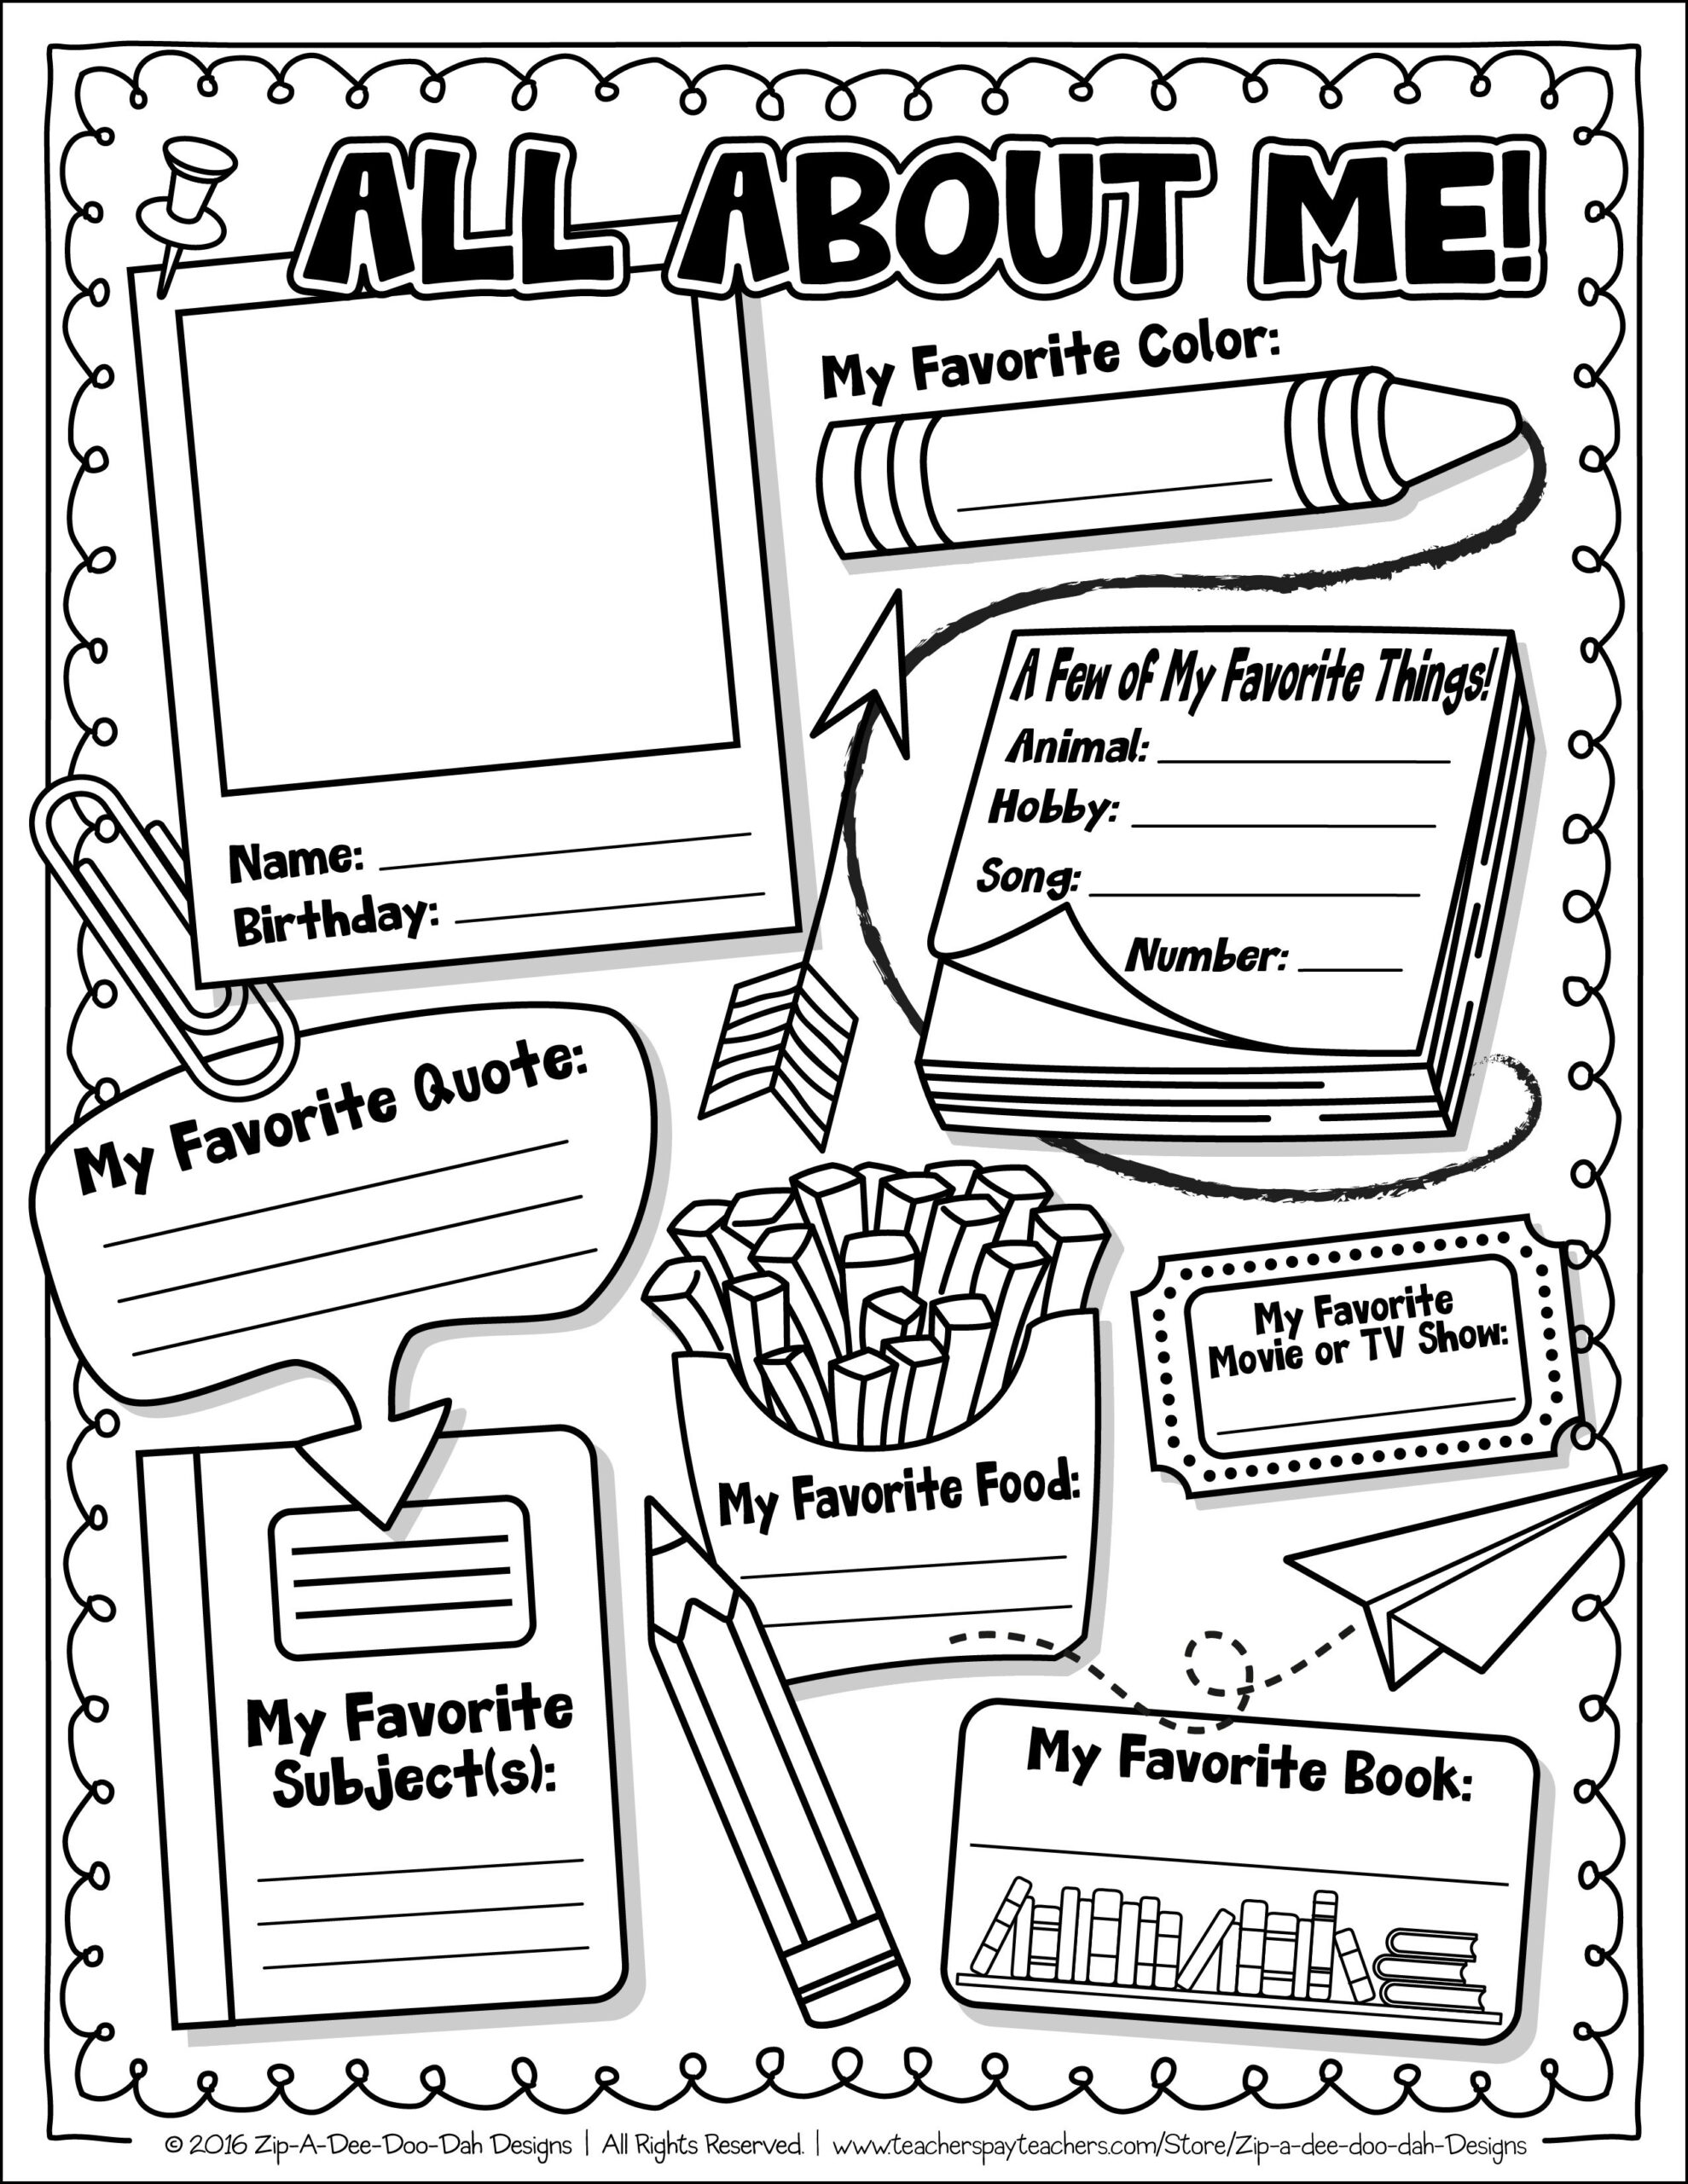  FREE All About Me Activity Worksheet About Me Activities All About 